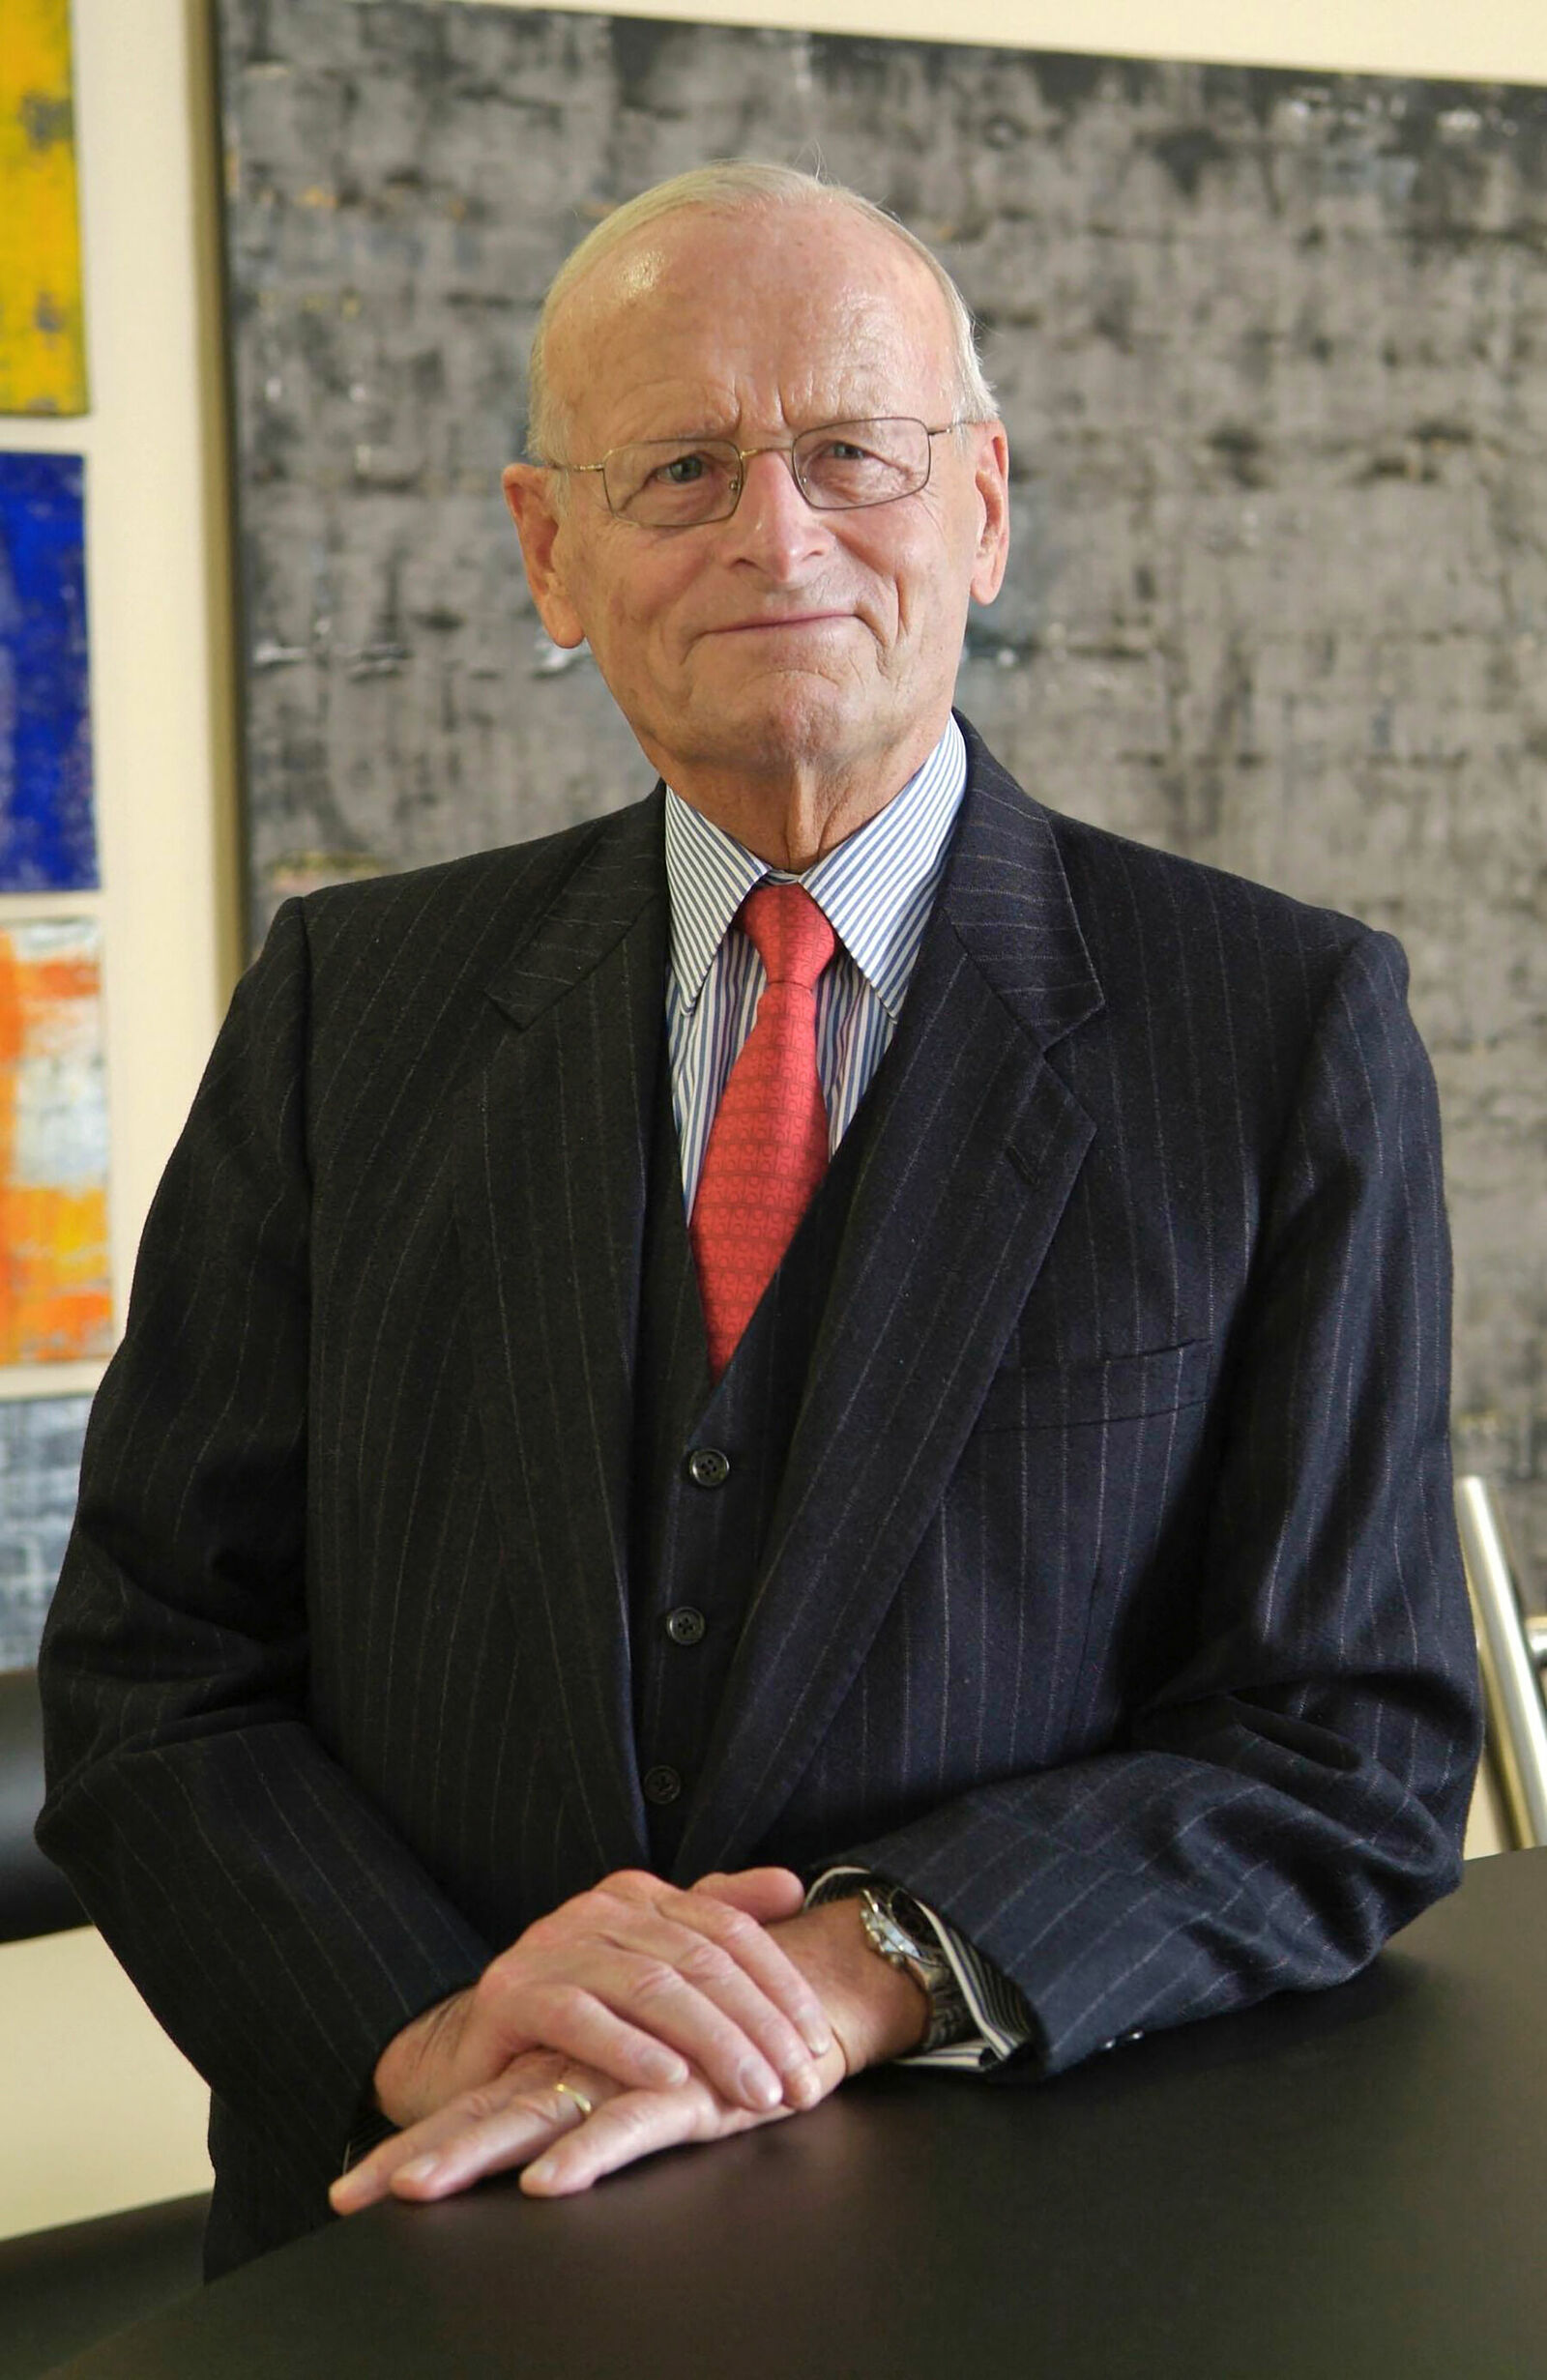 Prof. Dr. Carl H. Hahn, Chairman of the Board of Management of Volkswagen AG from 1982 to 1992